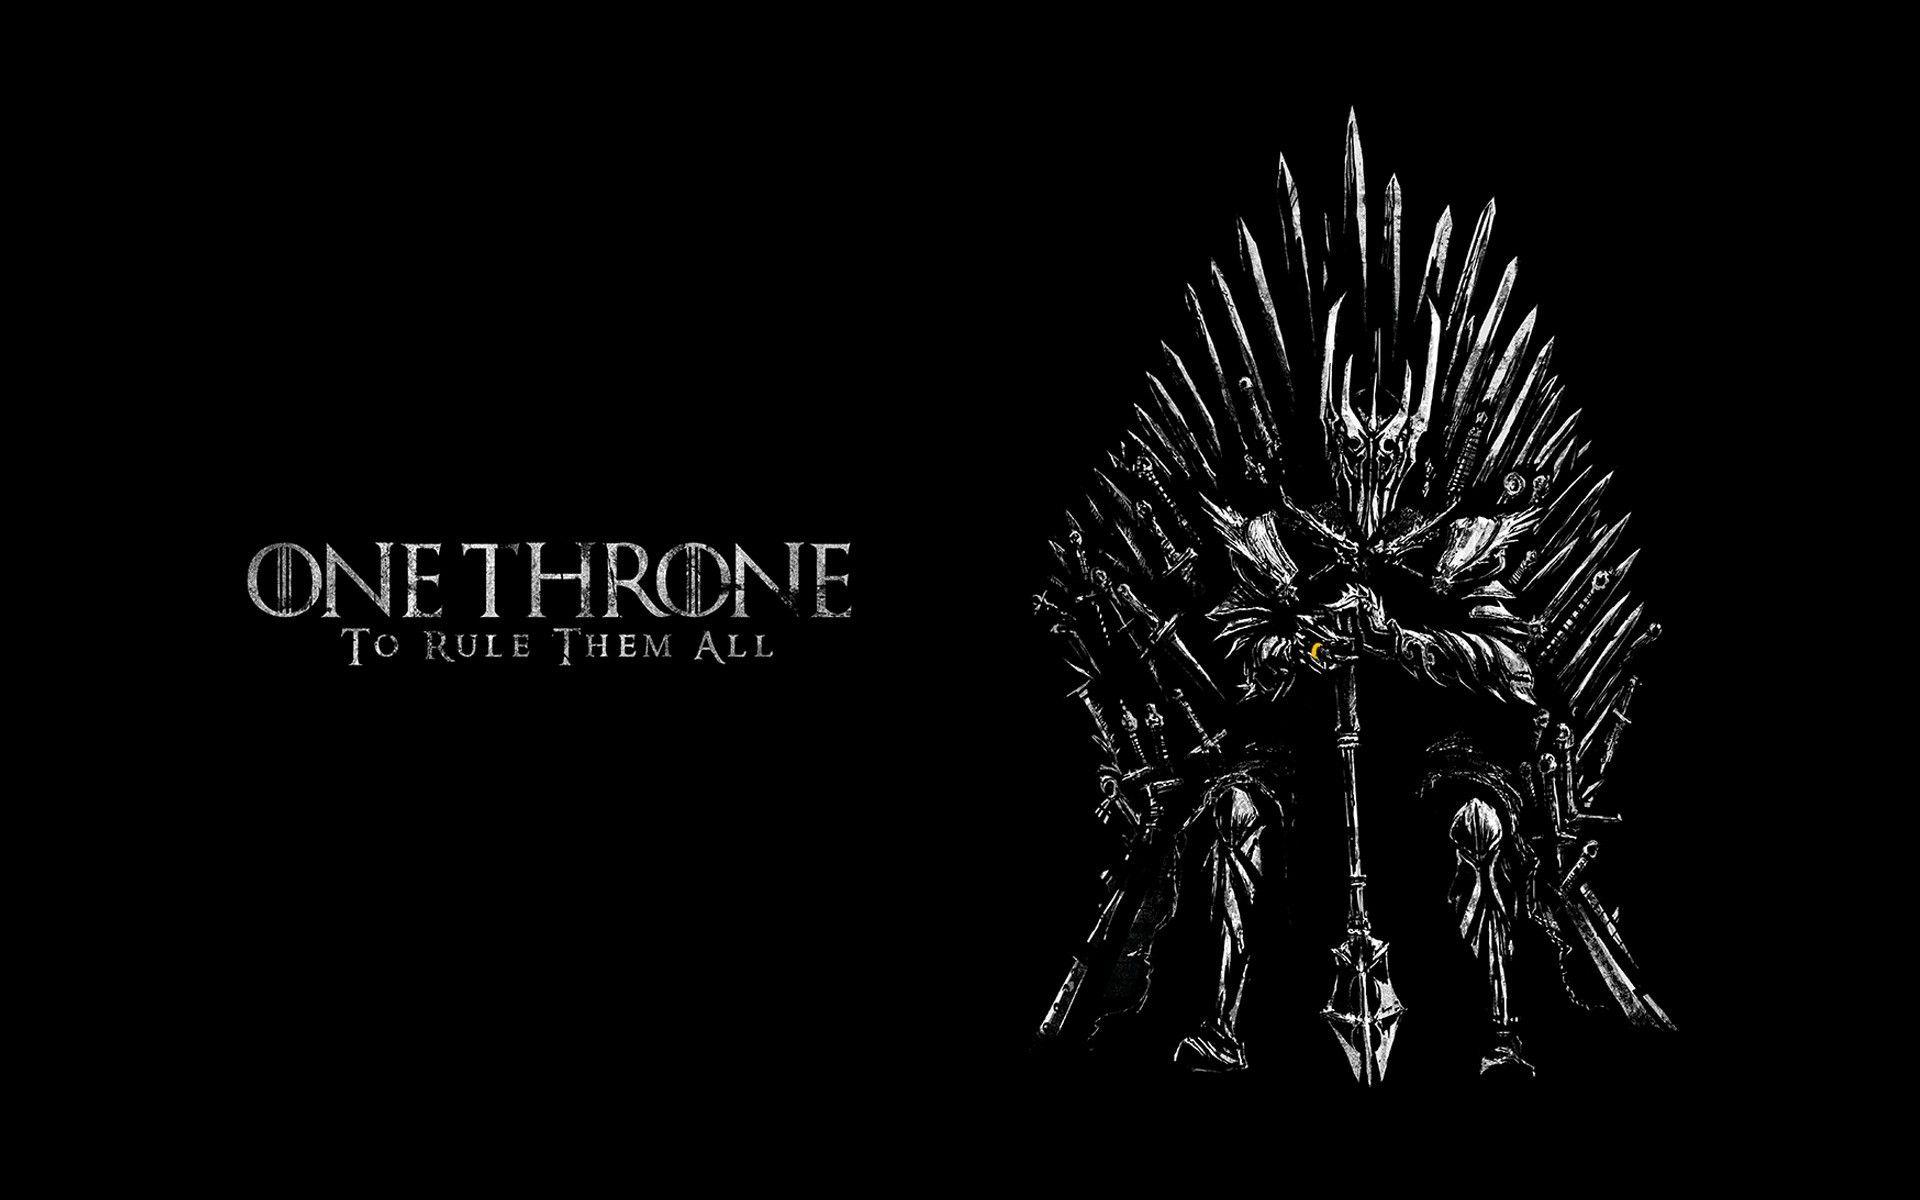 Game of Thrones Lord of The Rings crossover free desktop background